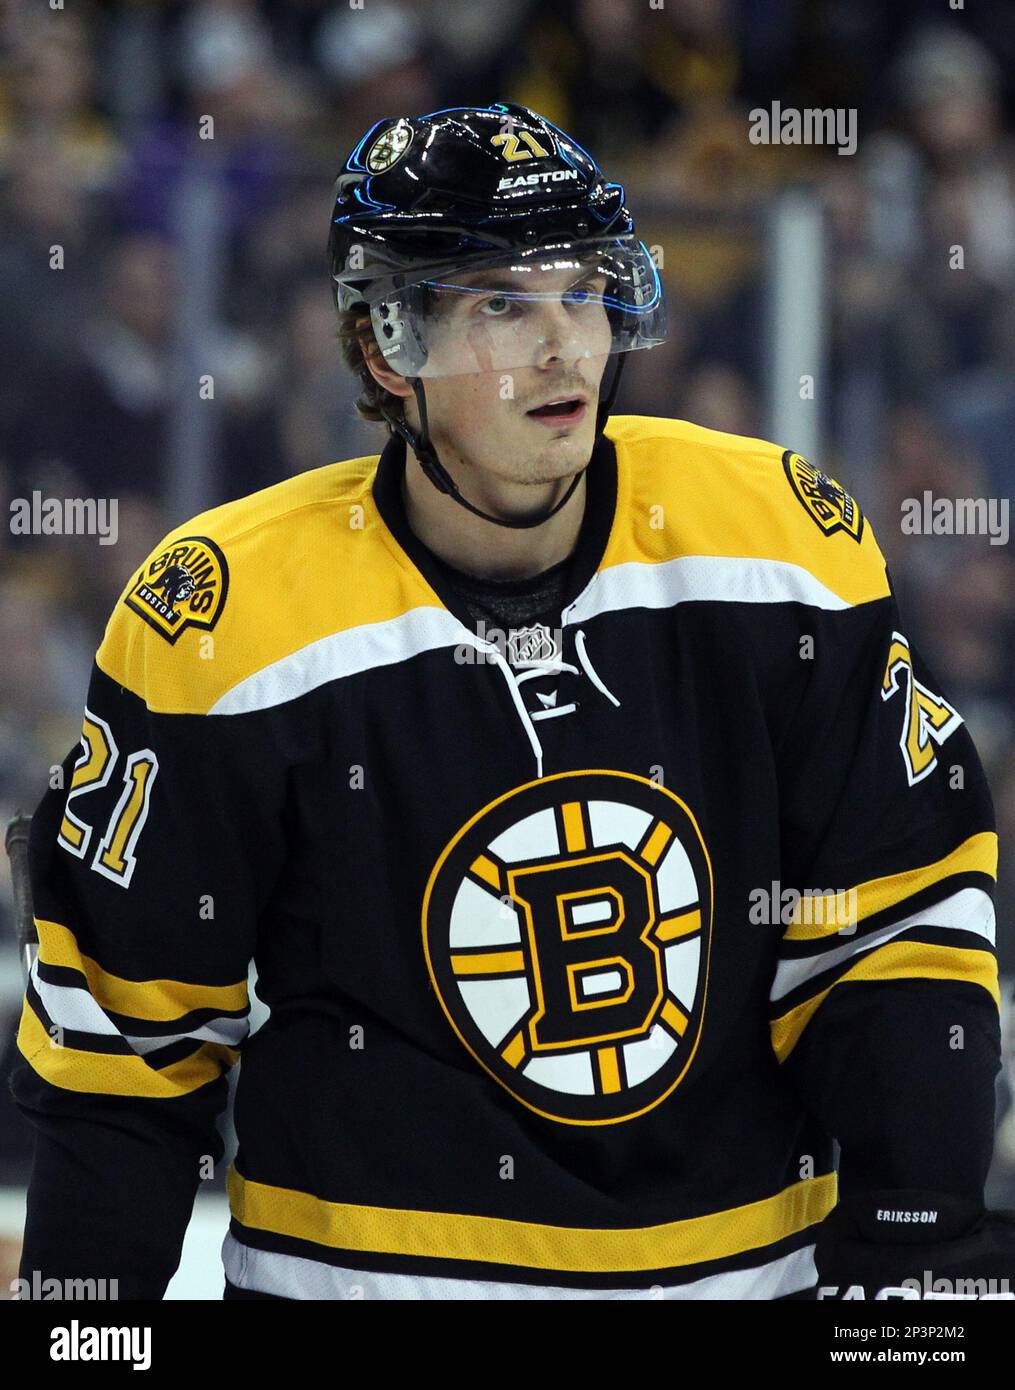 With Carl Soderberg gone, what will Bruins do with Loui Eriksson?